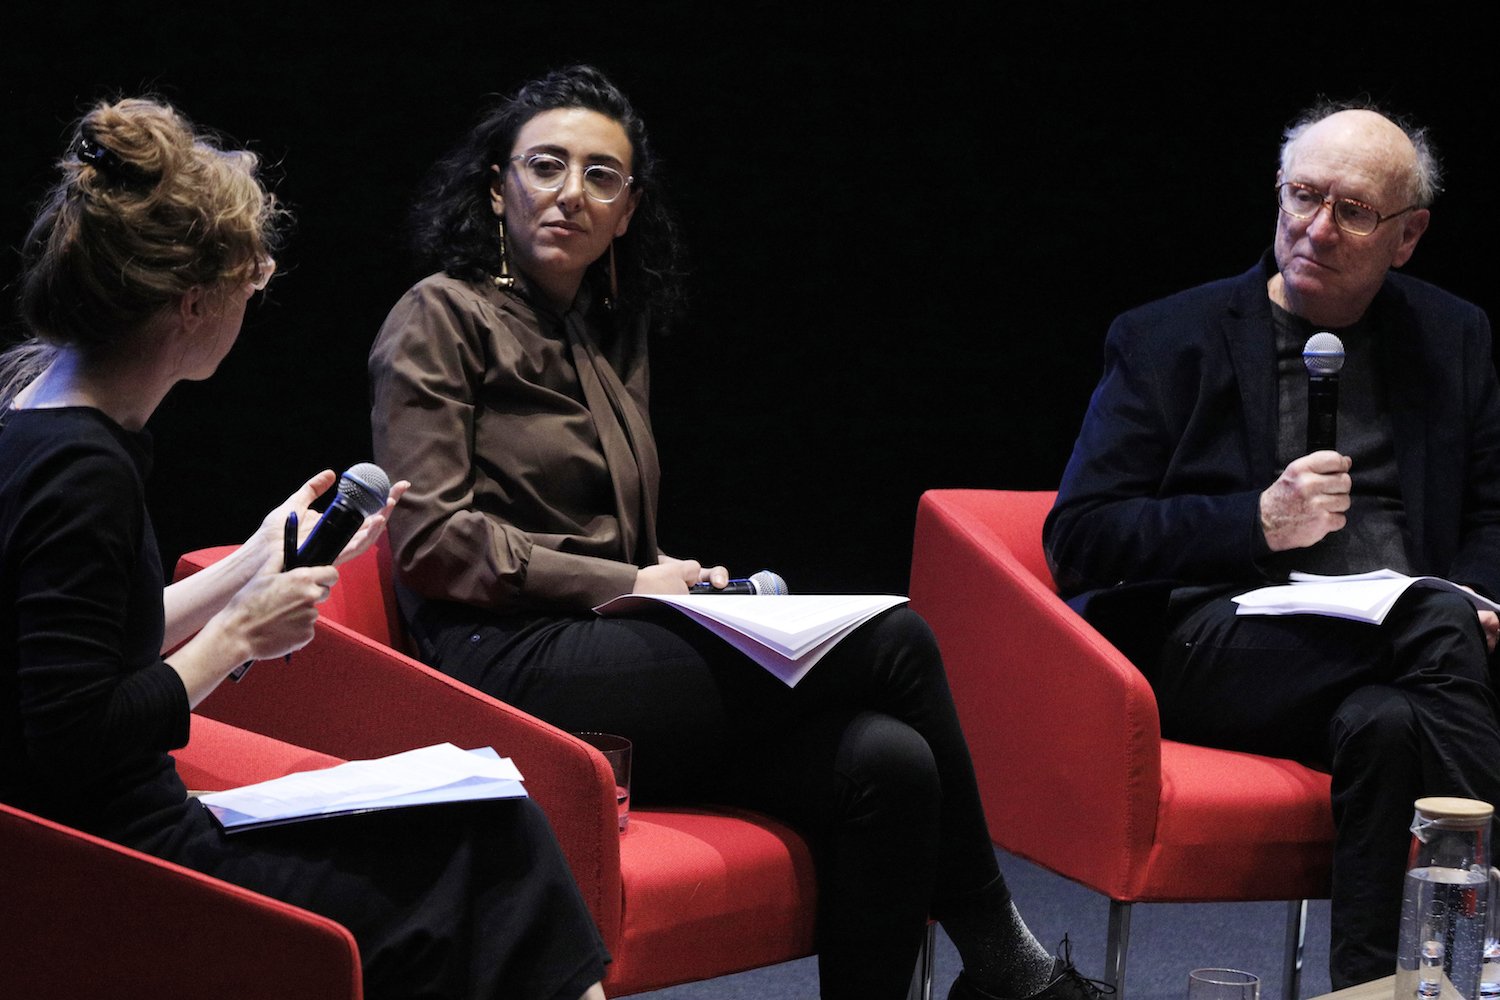 (left to right) Catherine Fennell, Nadia Gaber, and Jim Olson